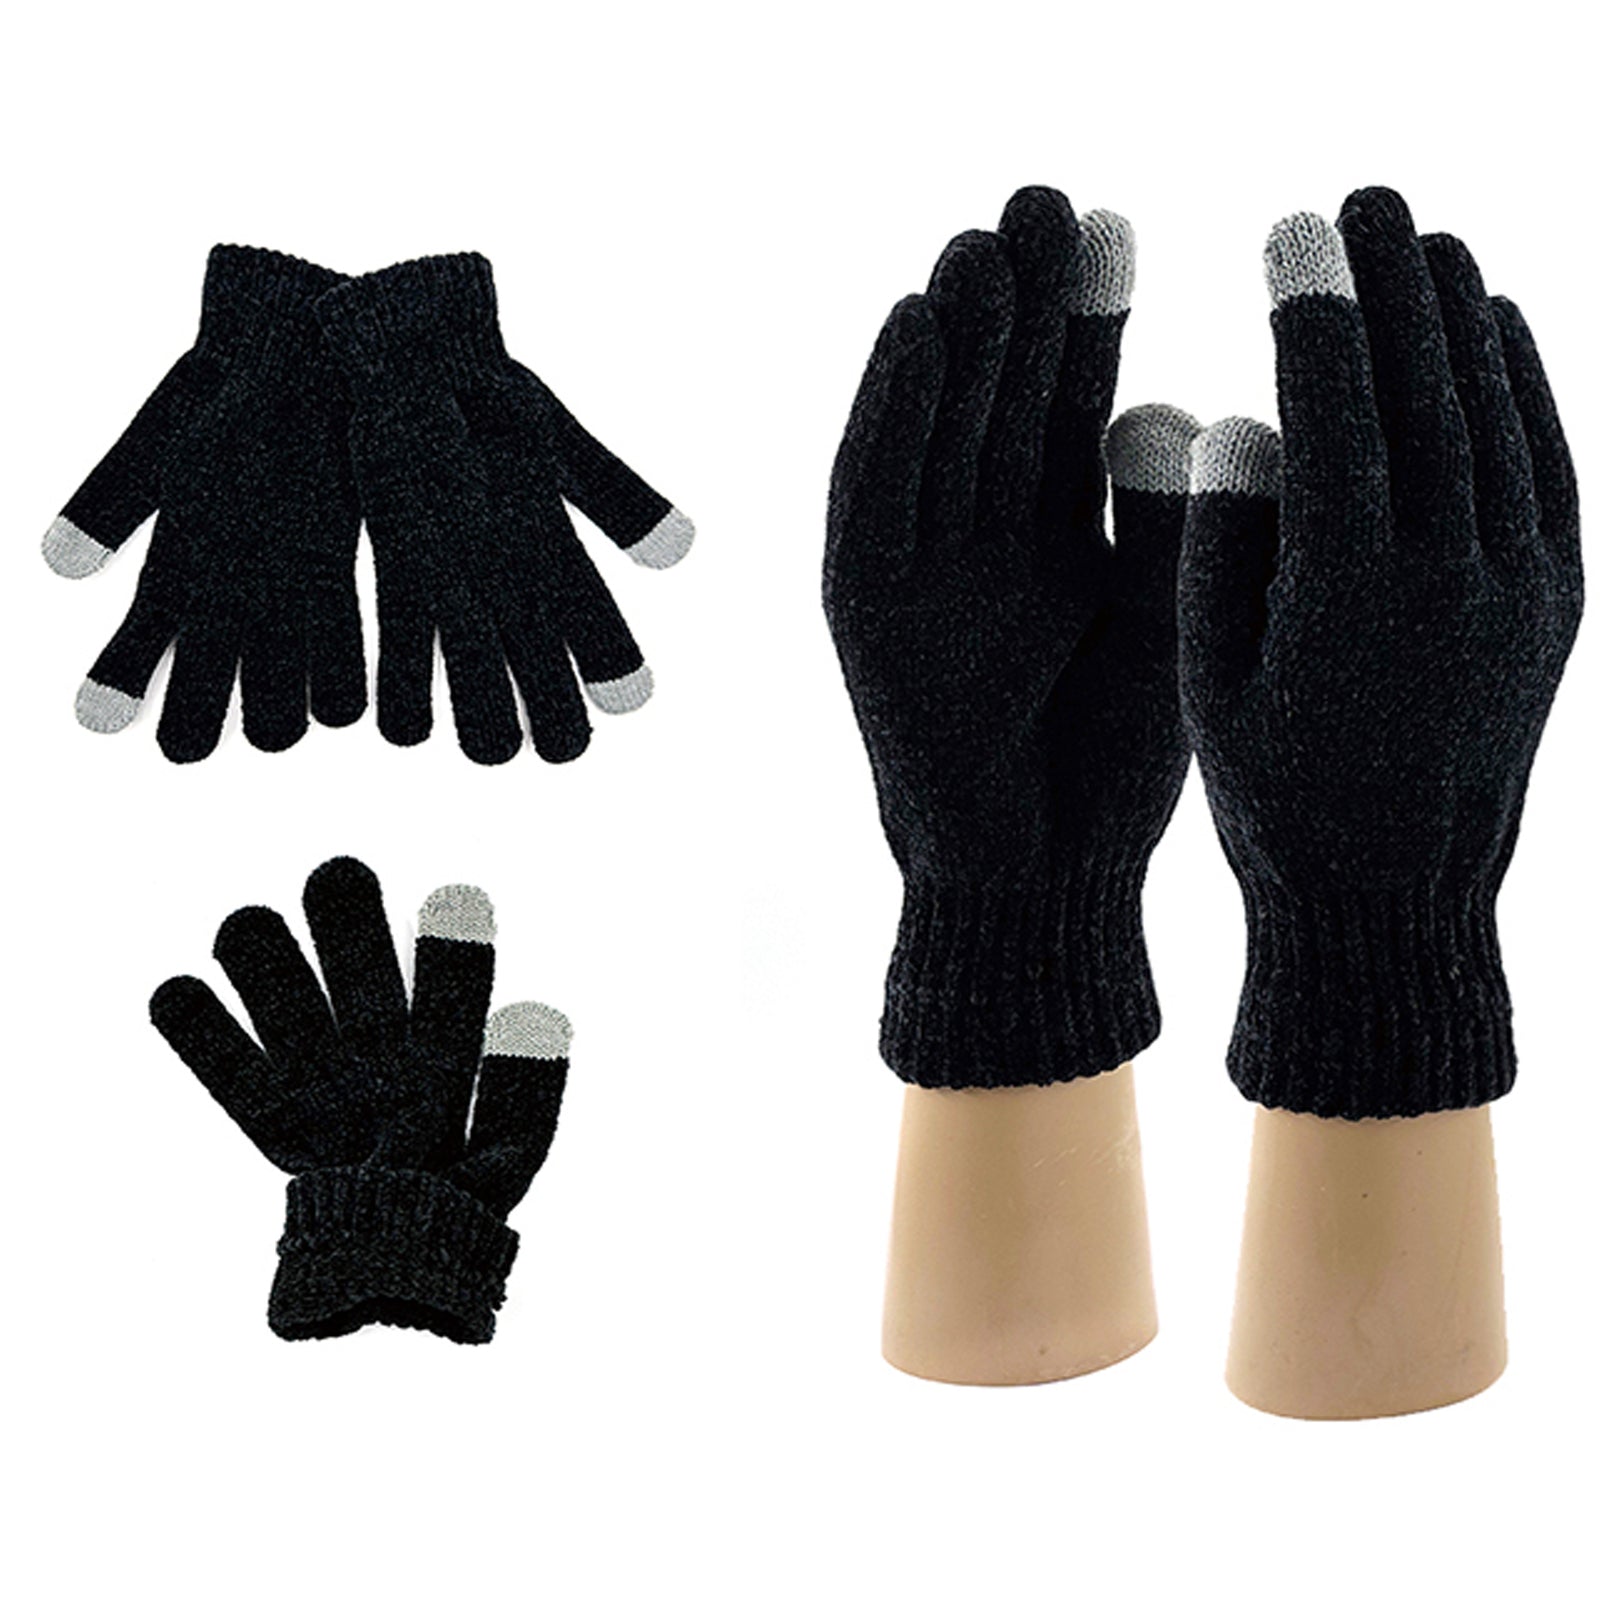 Wholesale Clothing Accessories Schmidt Men's Touch Screen Gloves Black NH210